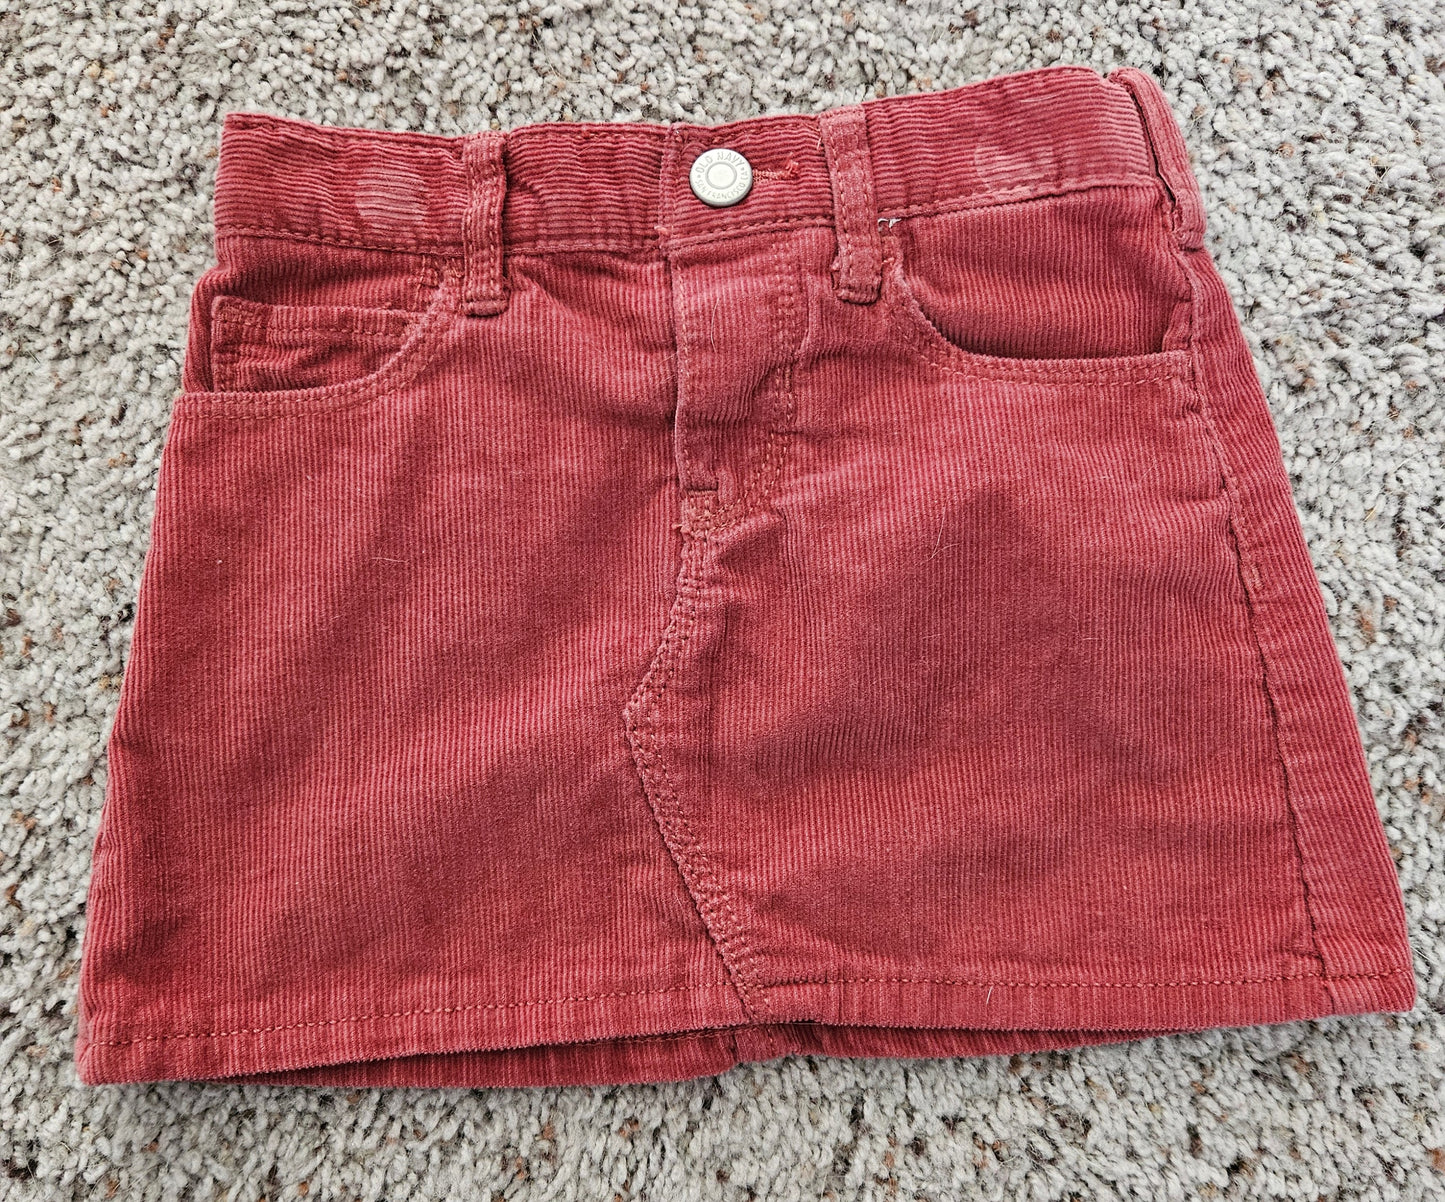 2T Old Navy red skirt